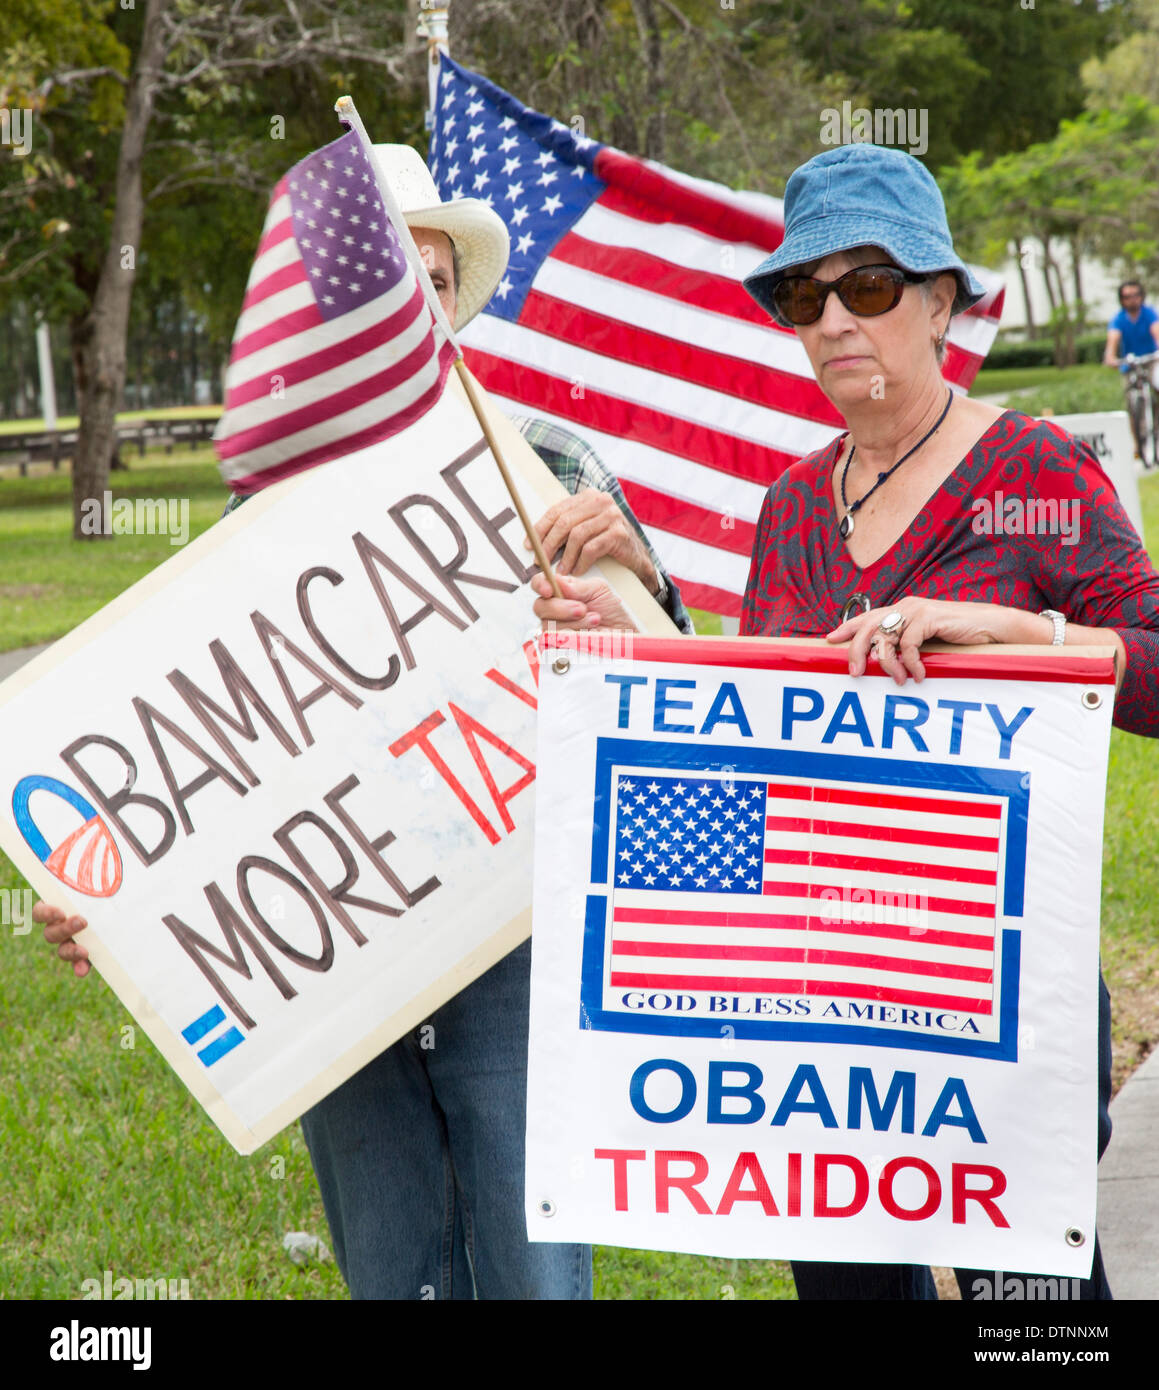 Cuban exiles, members of the Tea Party, rally on a variety of issues including opposition to President Obama and Obamacare. Stock Photo